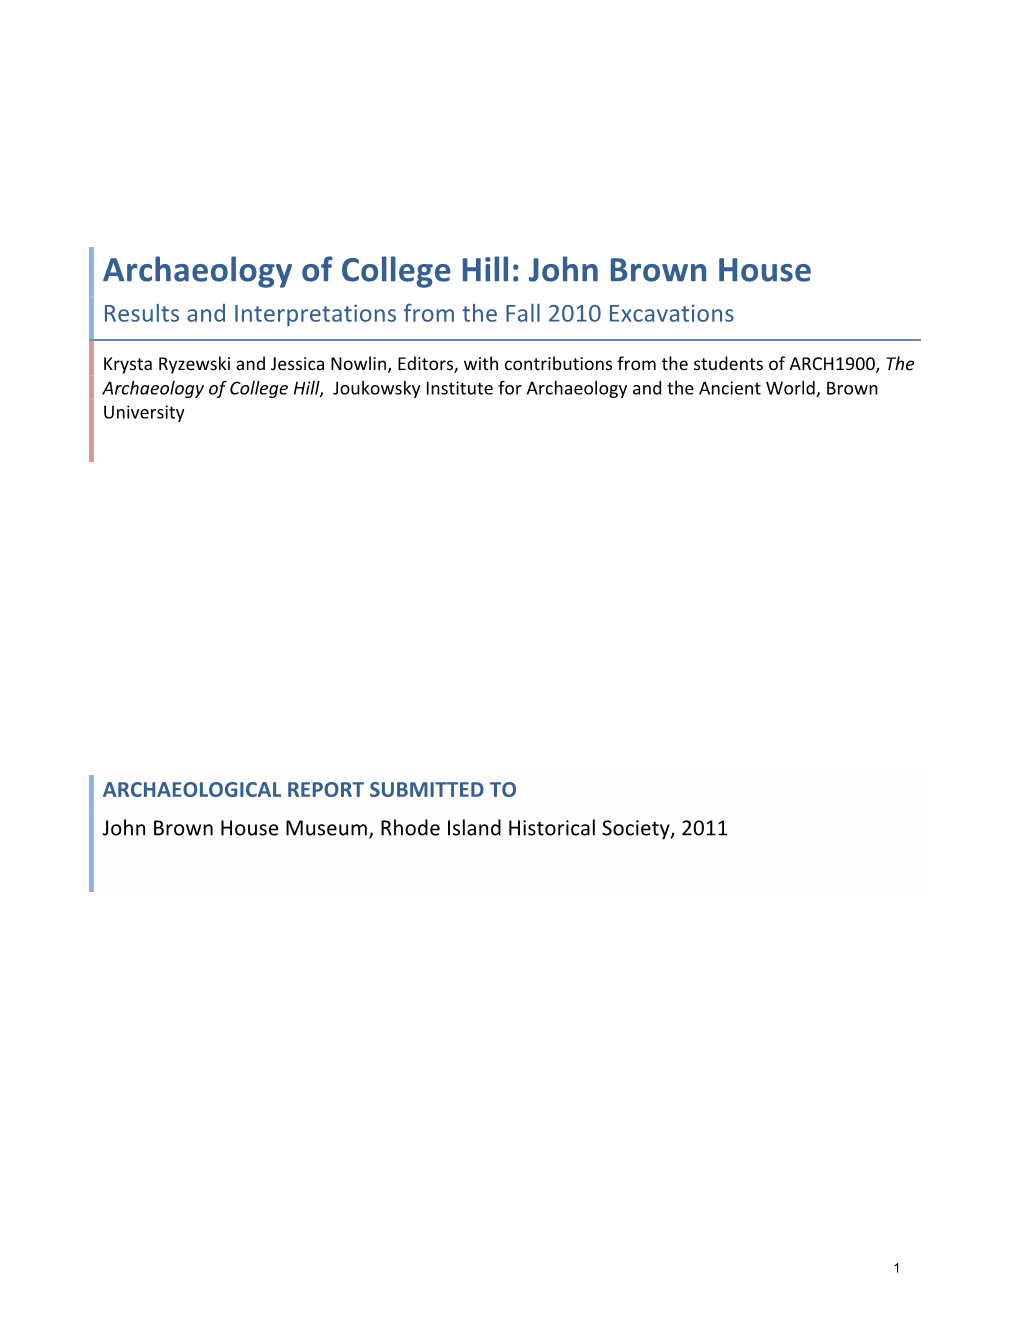 Archaeology of College Hill: John Brown House Results and Interpretations from the Fall 2010 Excavations